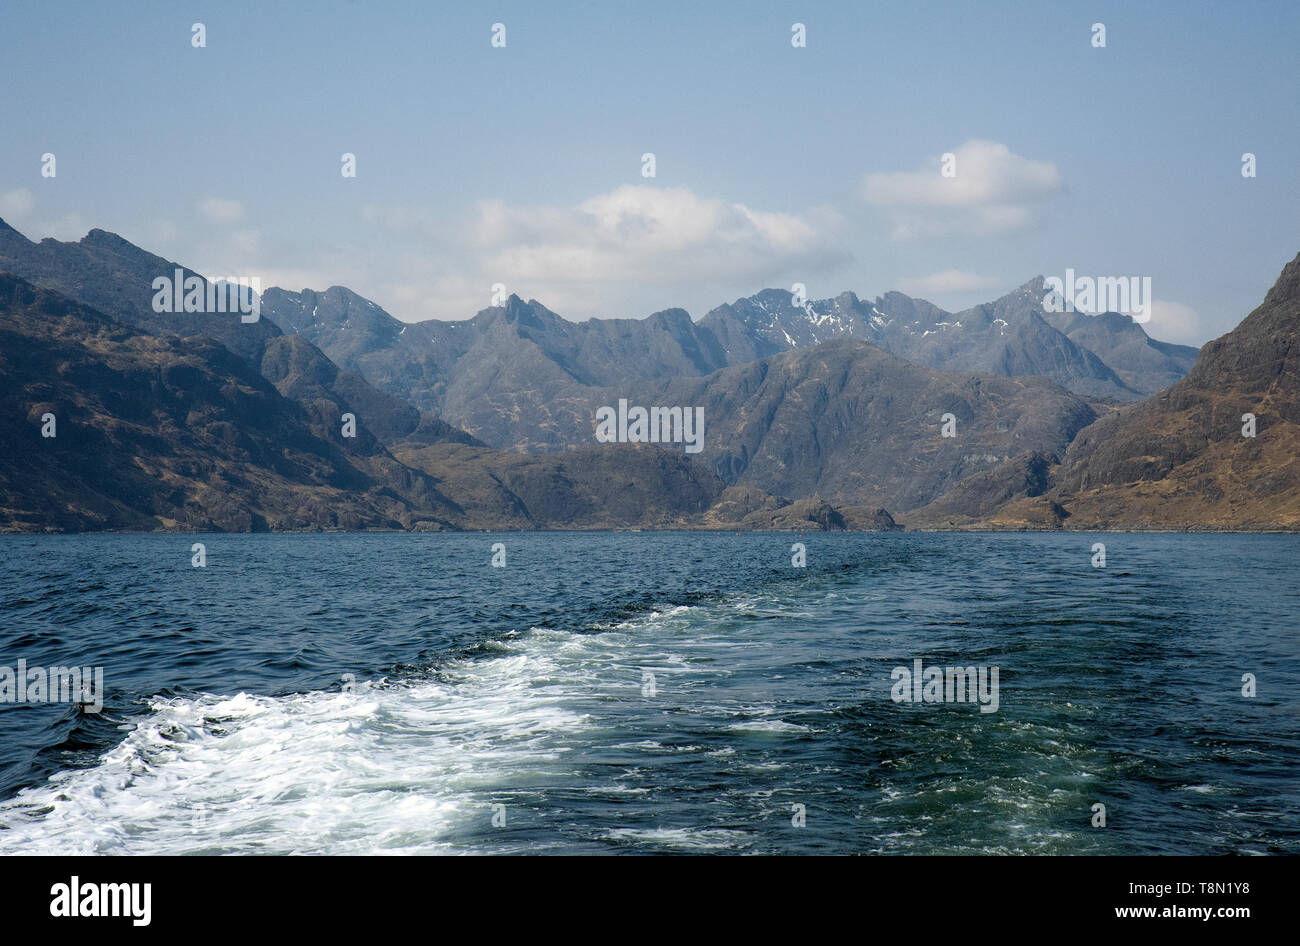 Travelling across Loch Scavaig towards Elgol on the Bella Jane tour boat with the Black Cullin mountains of the Isle of Skye in the background. Stock Photo